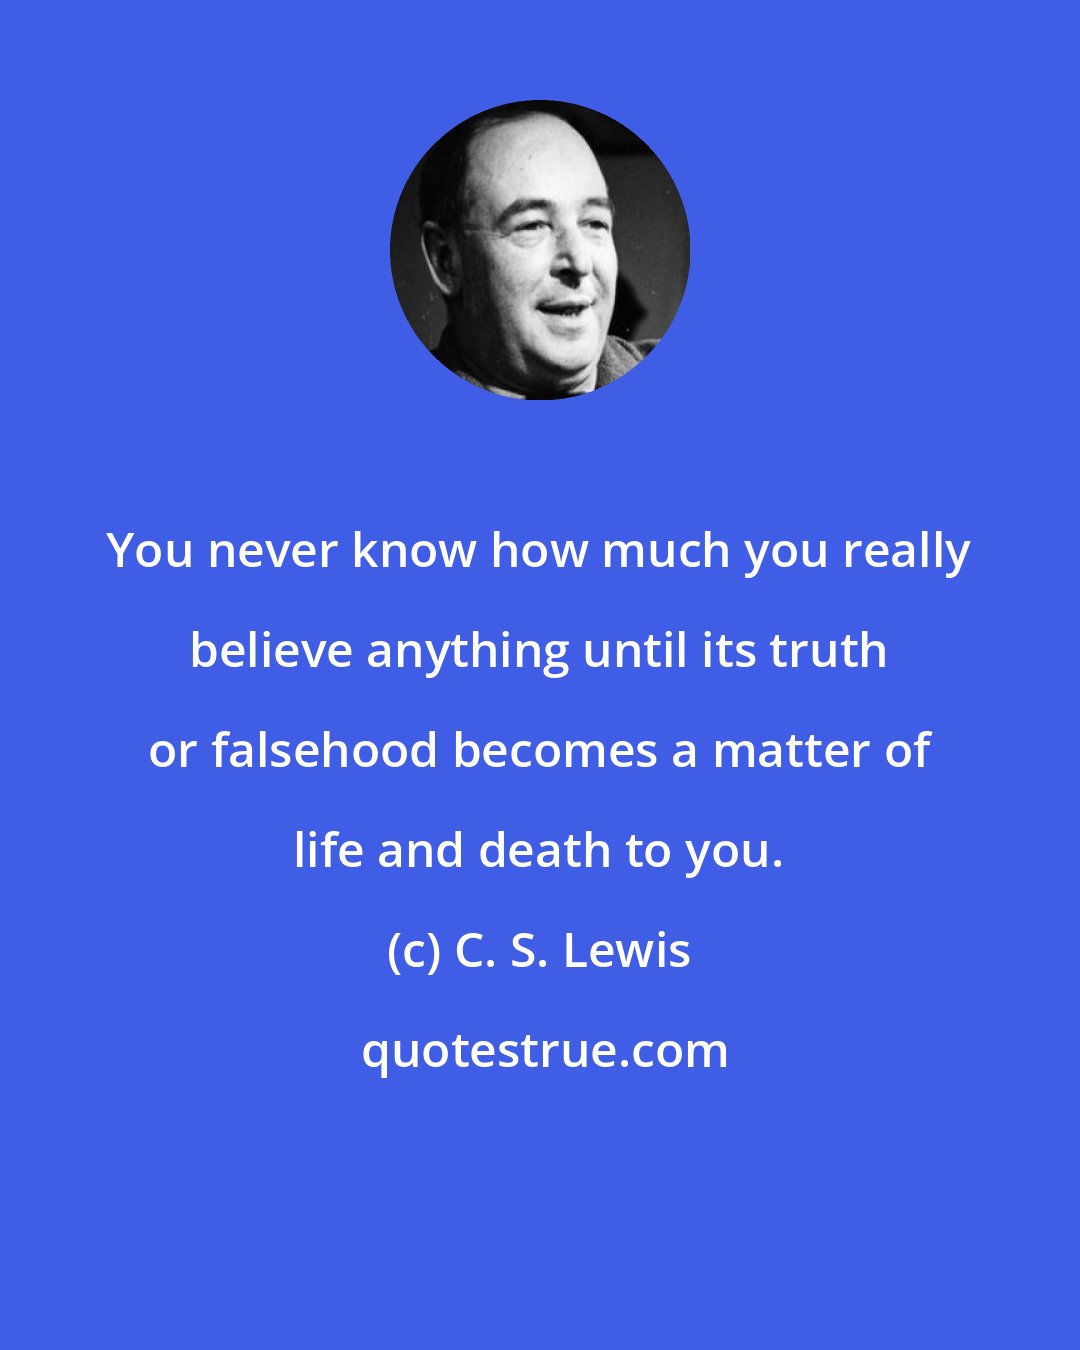 C. S. Lewis: You never know how much you really believe anything until its truth or falsehood becomes a matter of life and death to you.